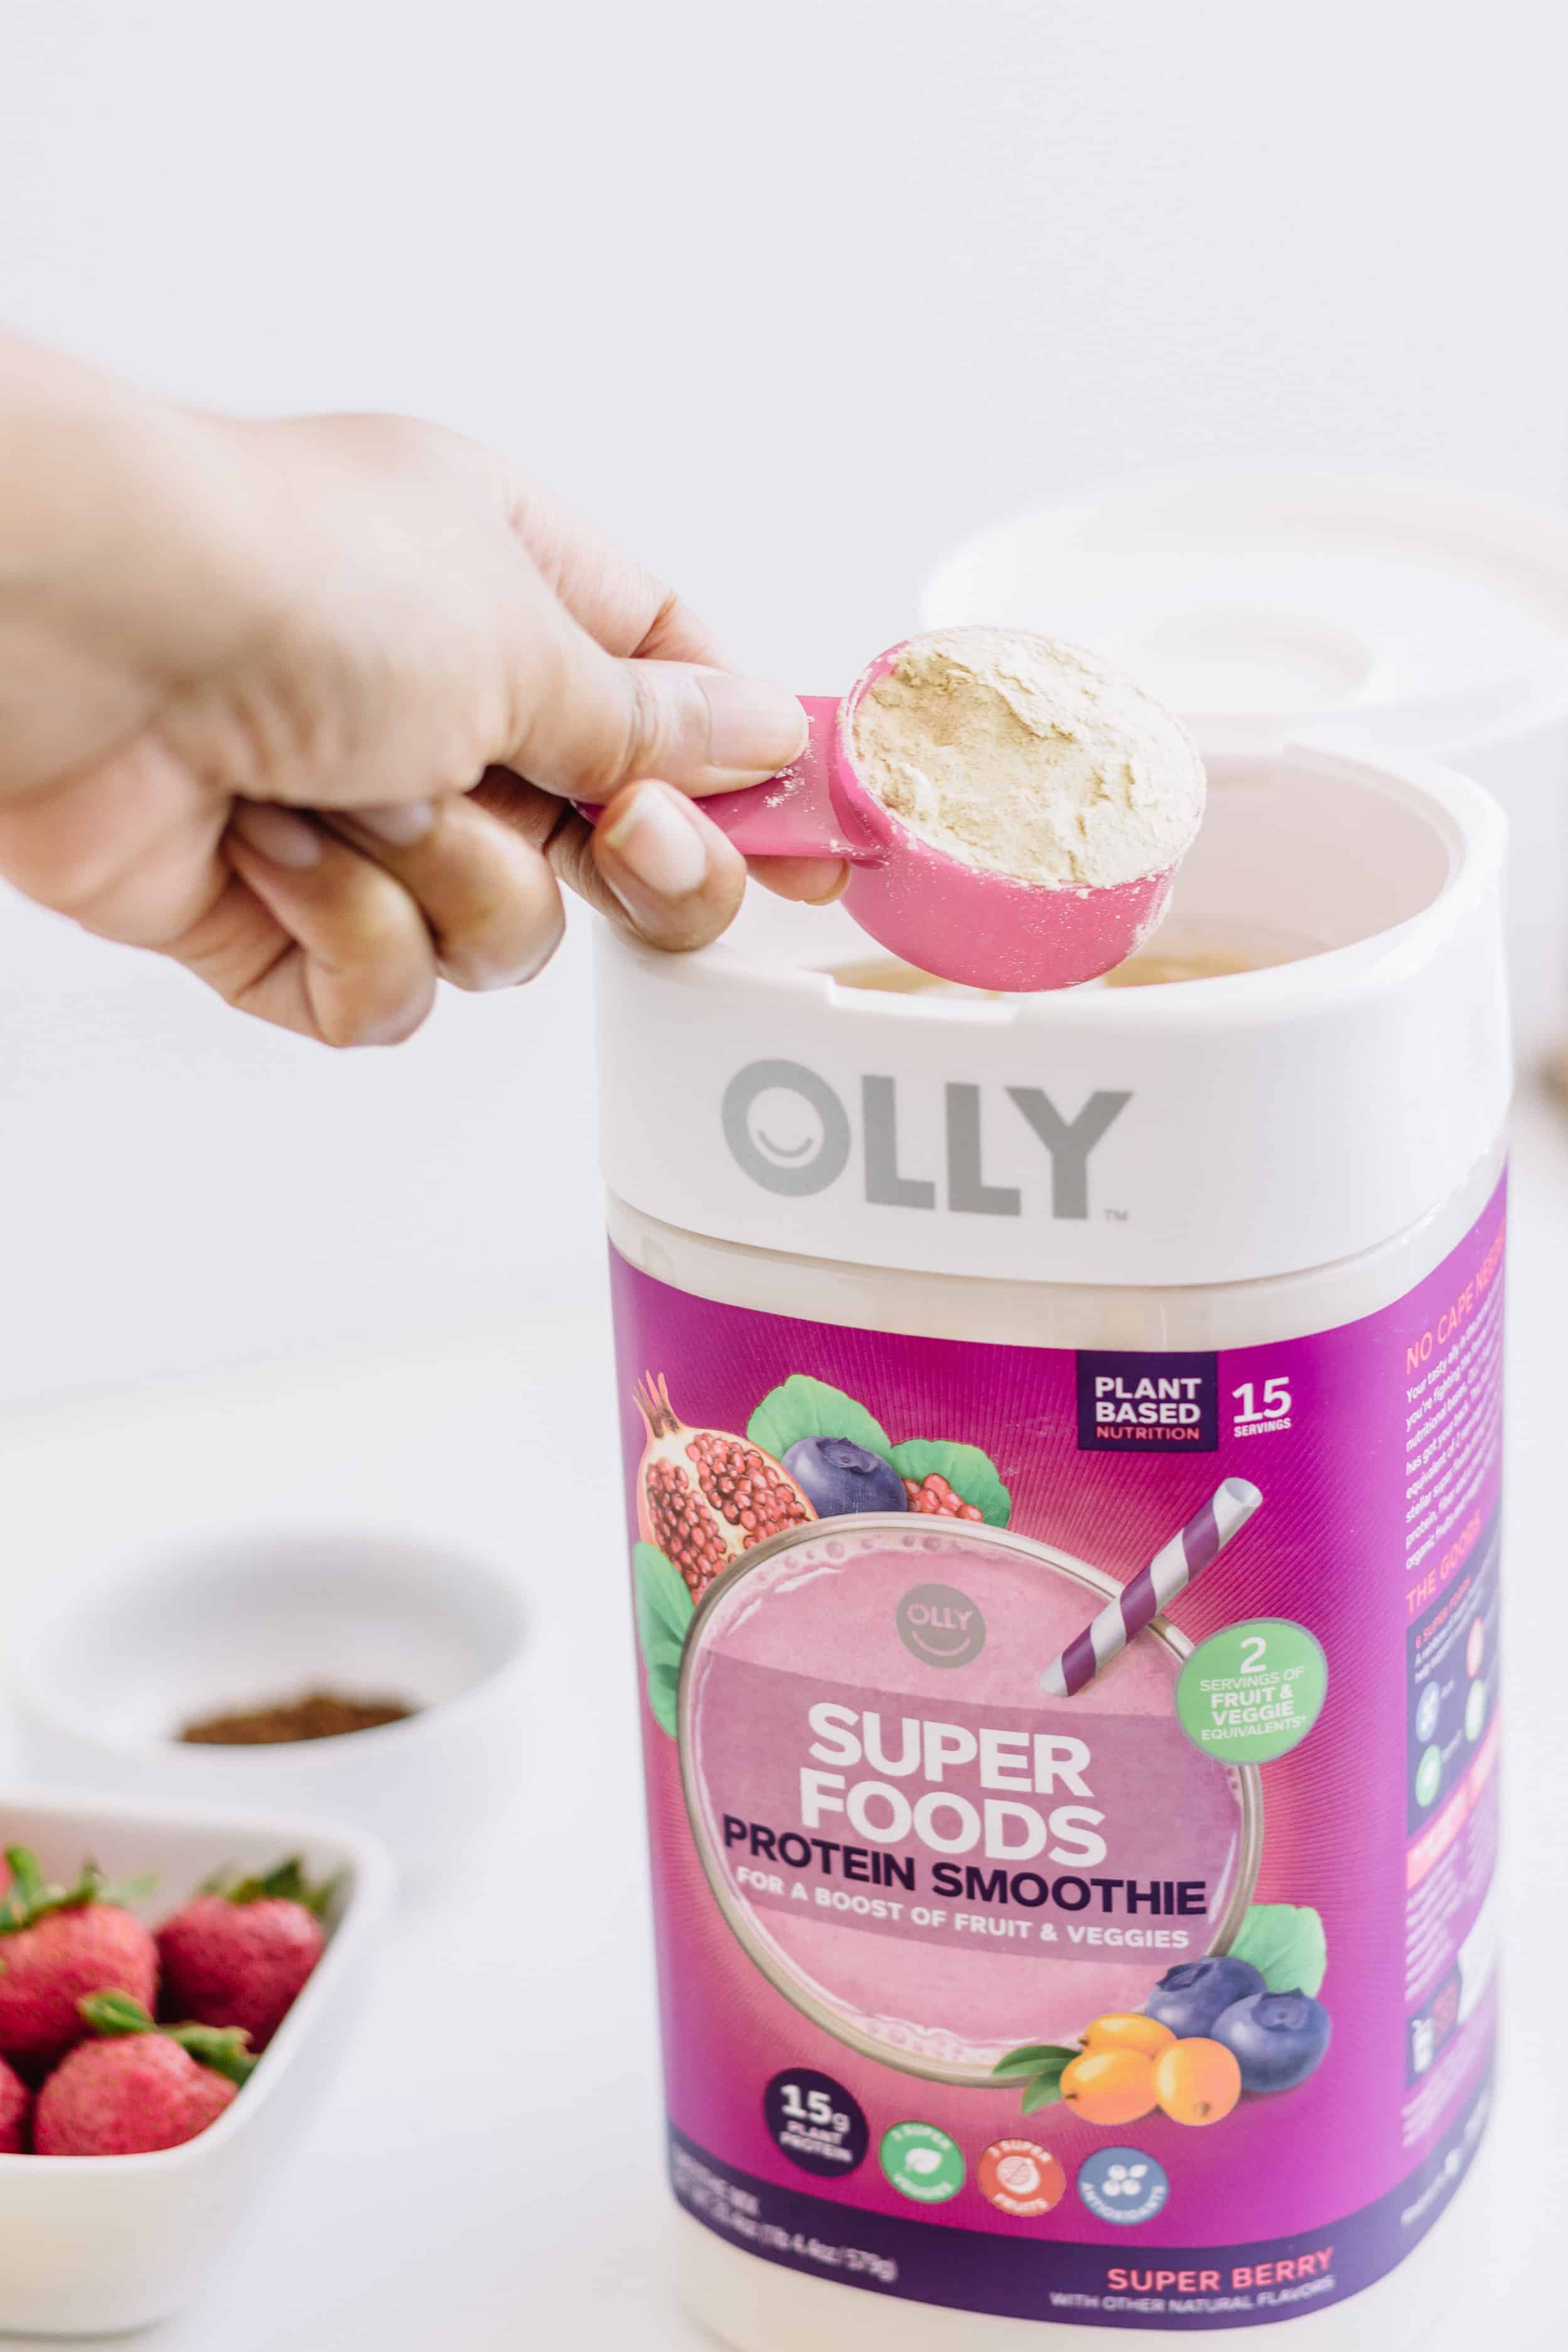 olly super foods protein smoothie